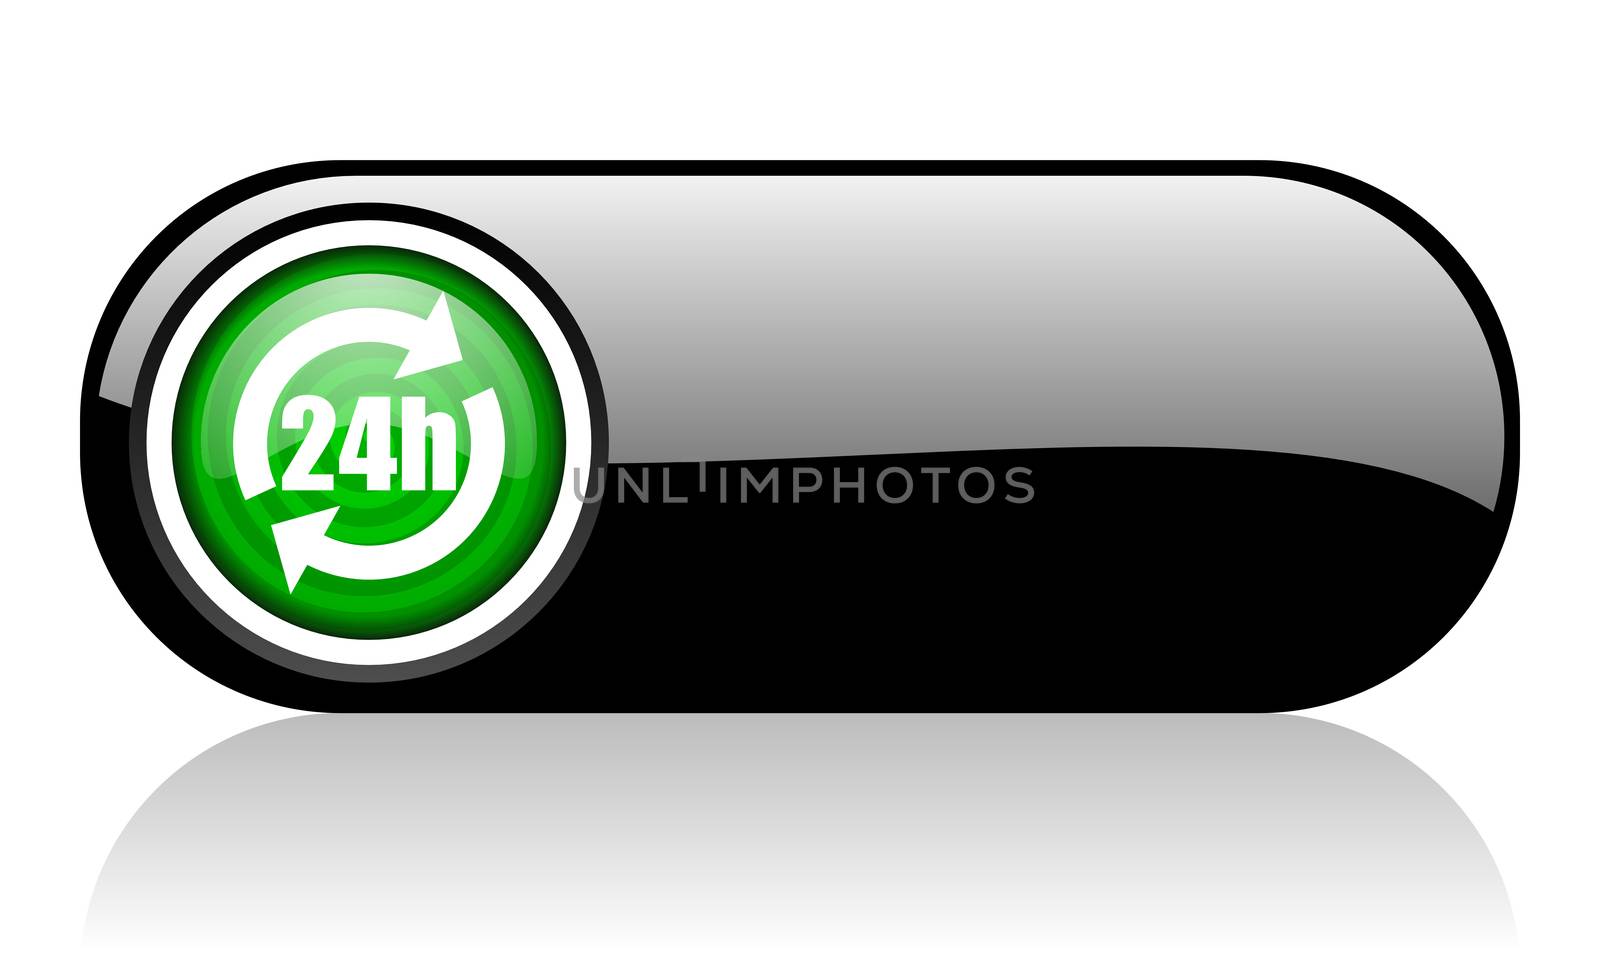 24h black and green web icon on white background